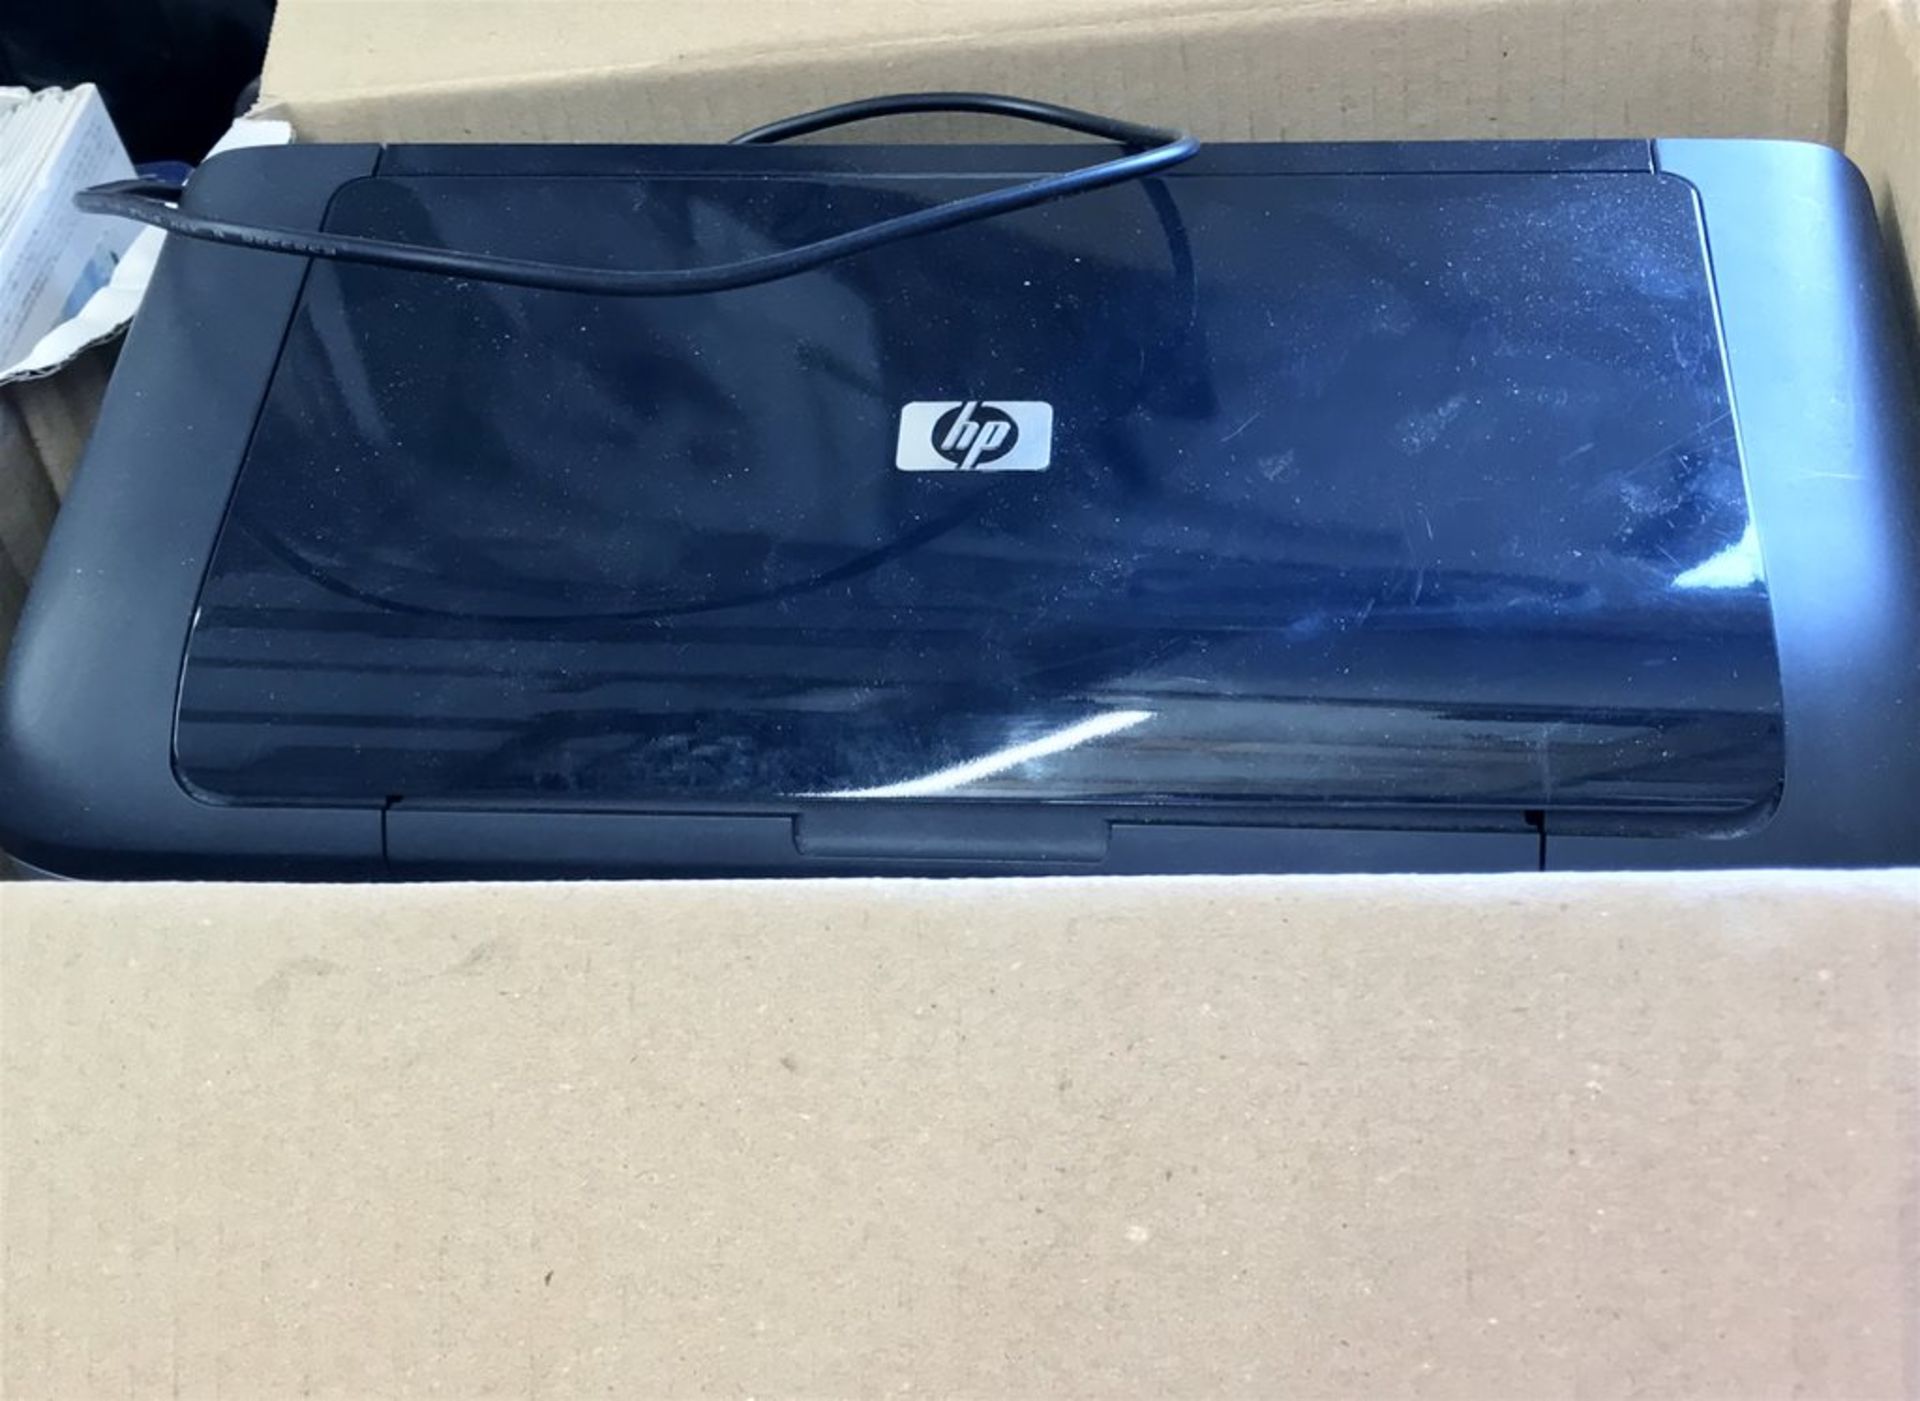 A Quantity I.T. Equipment - HP Officejet H470 With Power Adapter and USB Cable and approx 20 PC Mice